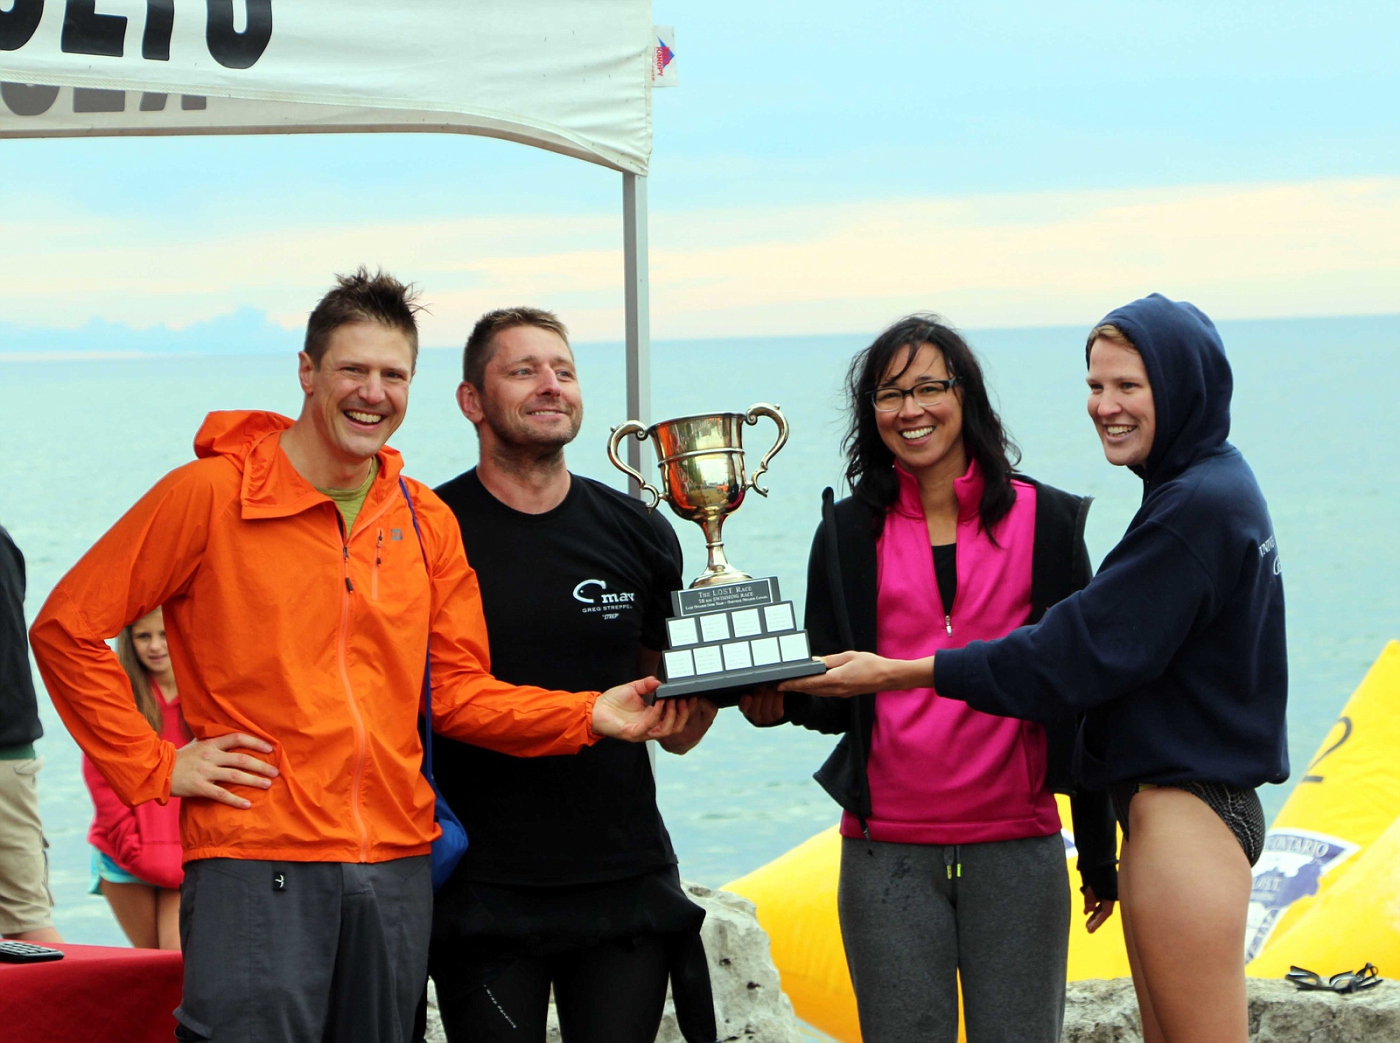 Winners of the 1000m; Mens Naked: Loren King, Mens Wetsuit and first overall: Greg Streppel, Womens Wetsuit: Lynn Rogers, Womens Naked: Sara Nicholson